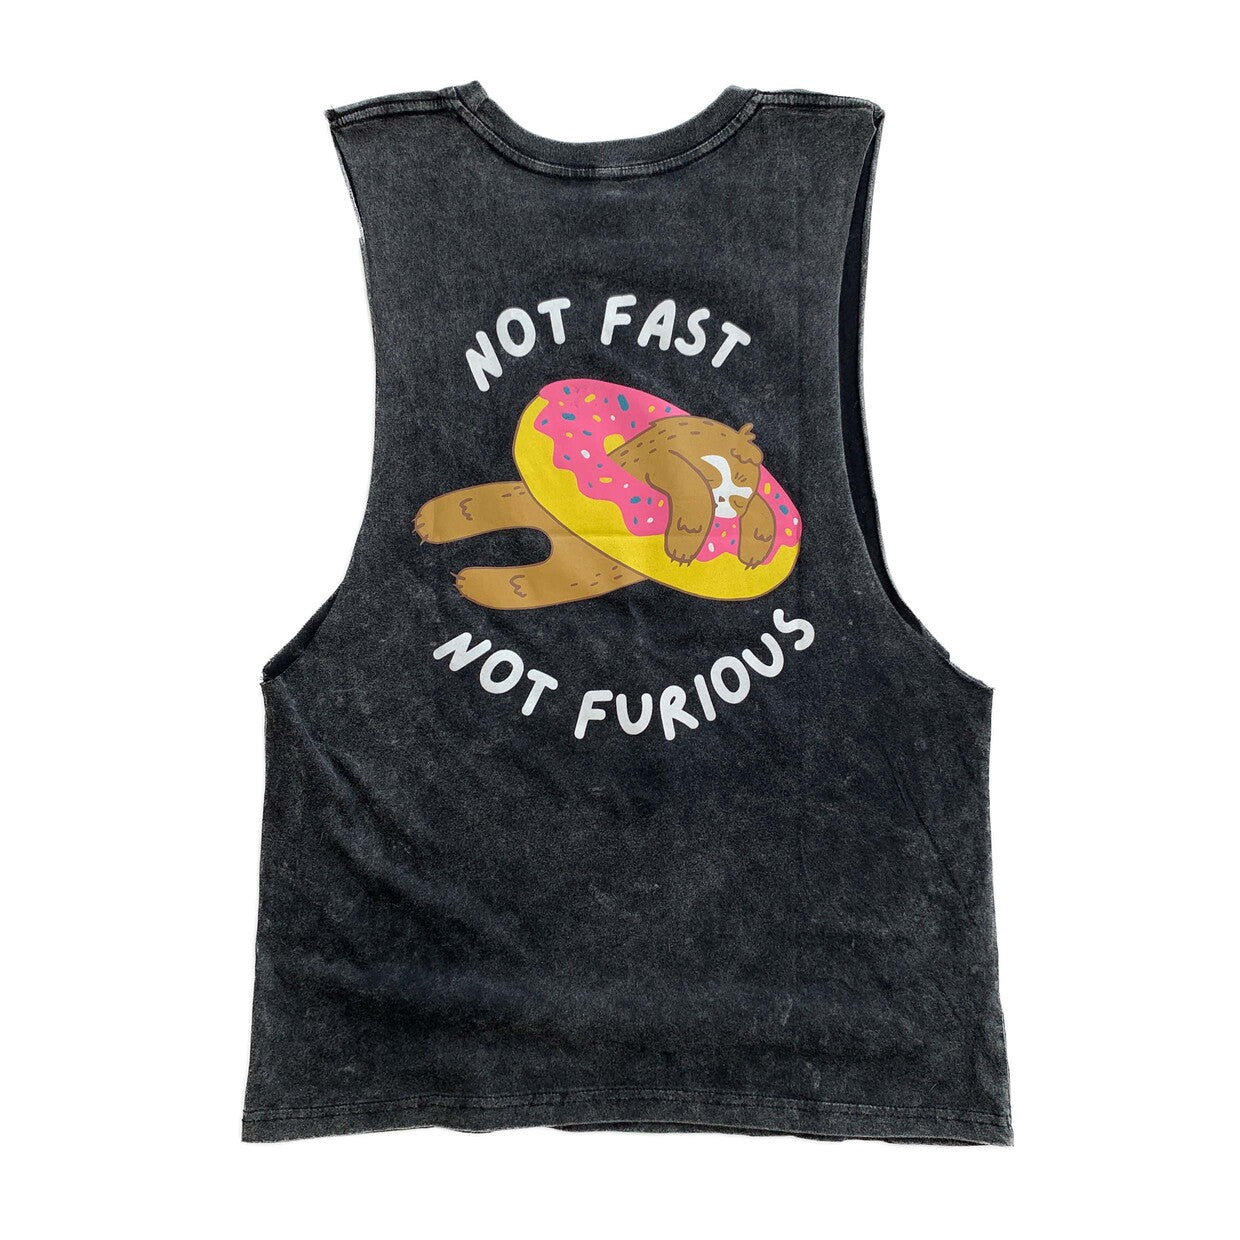 Not fast not furious (donut) muscle tank